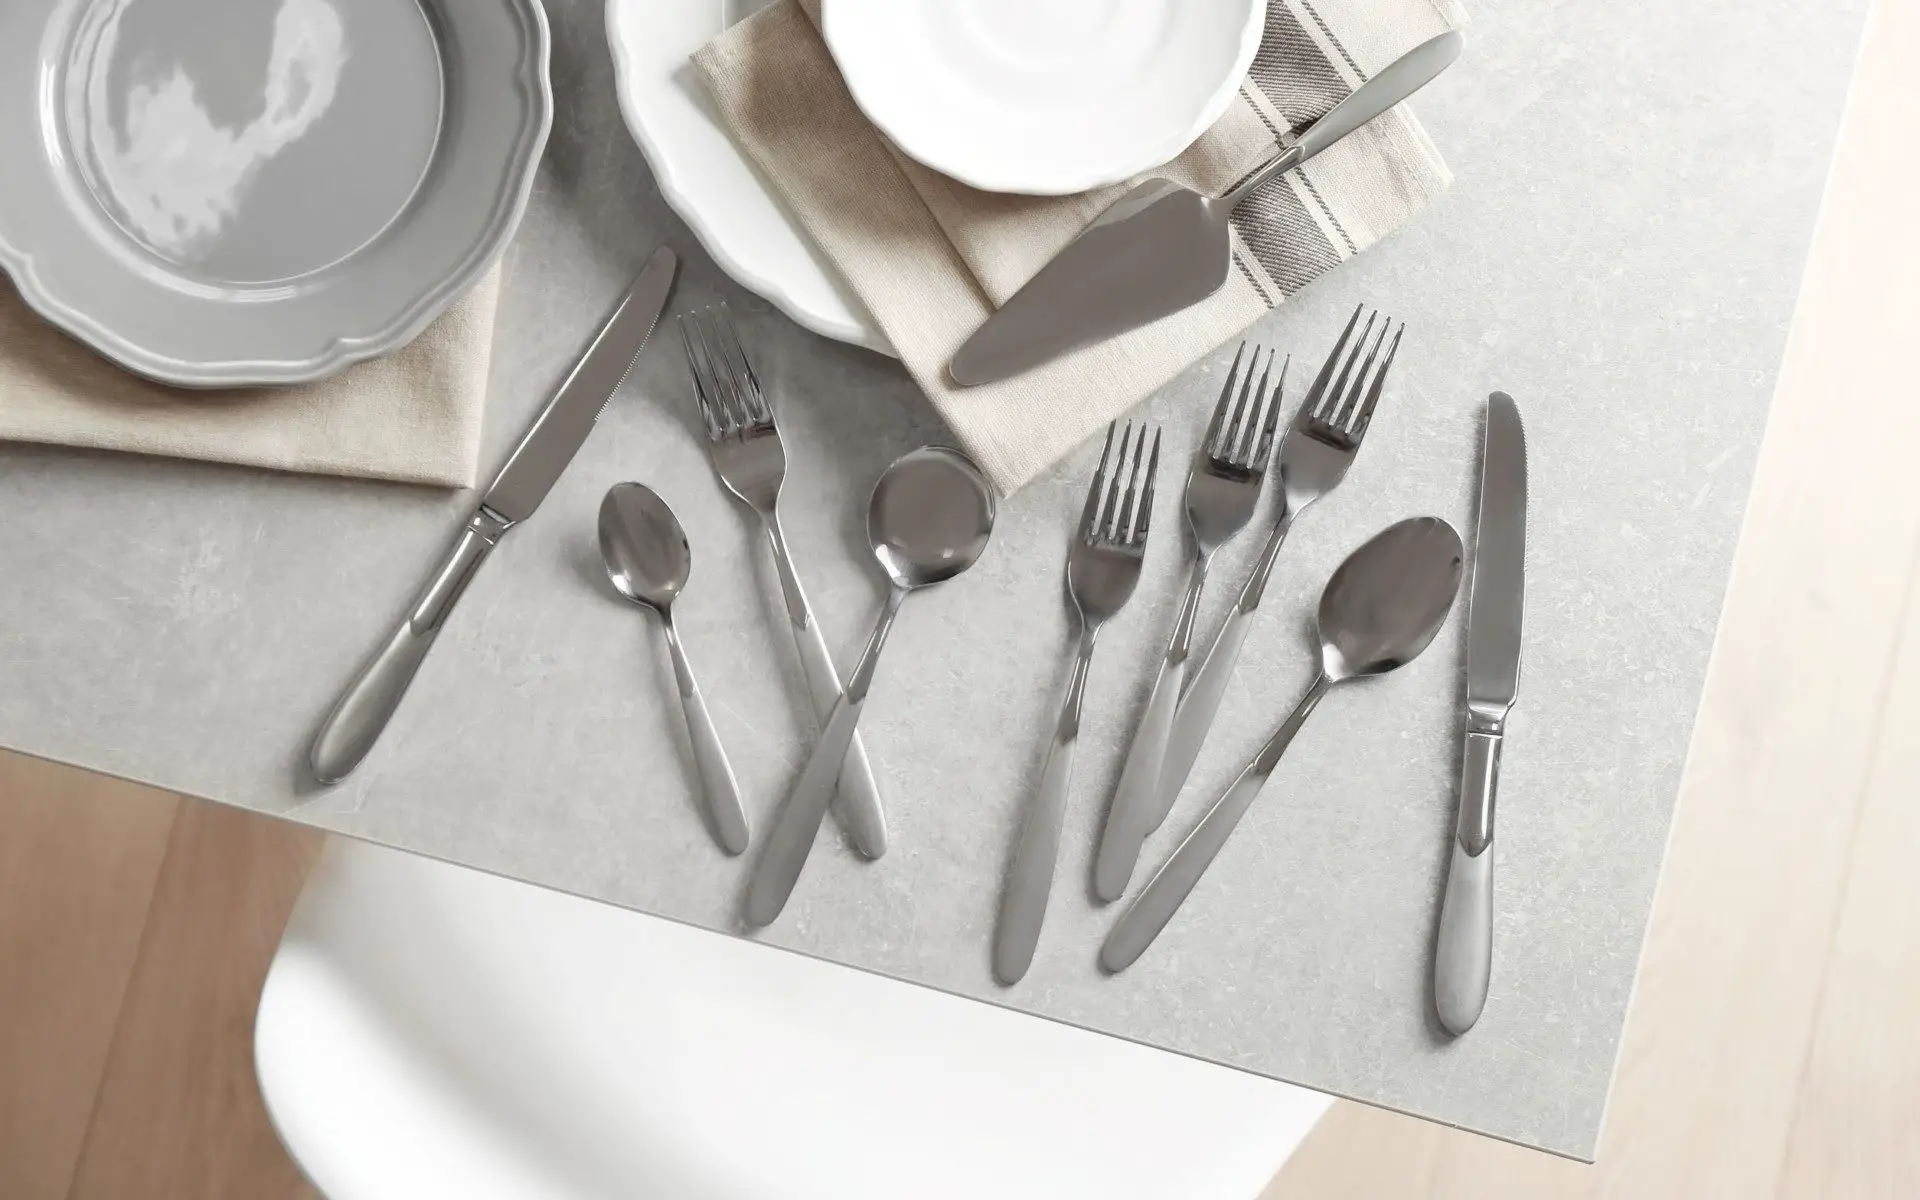 Are Metal Utensils Eco-Friendly